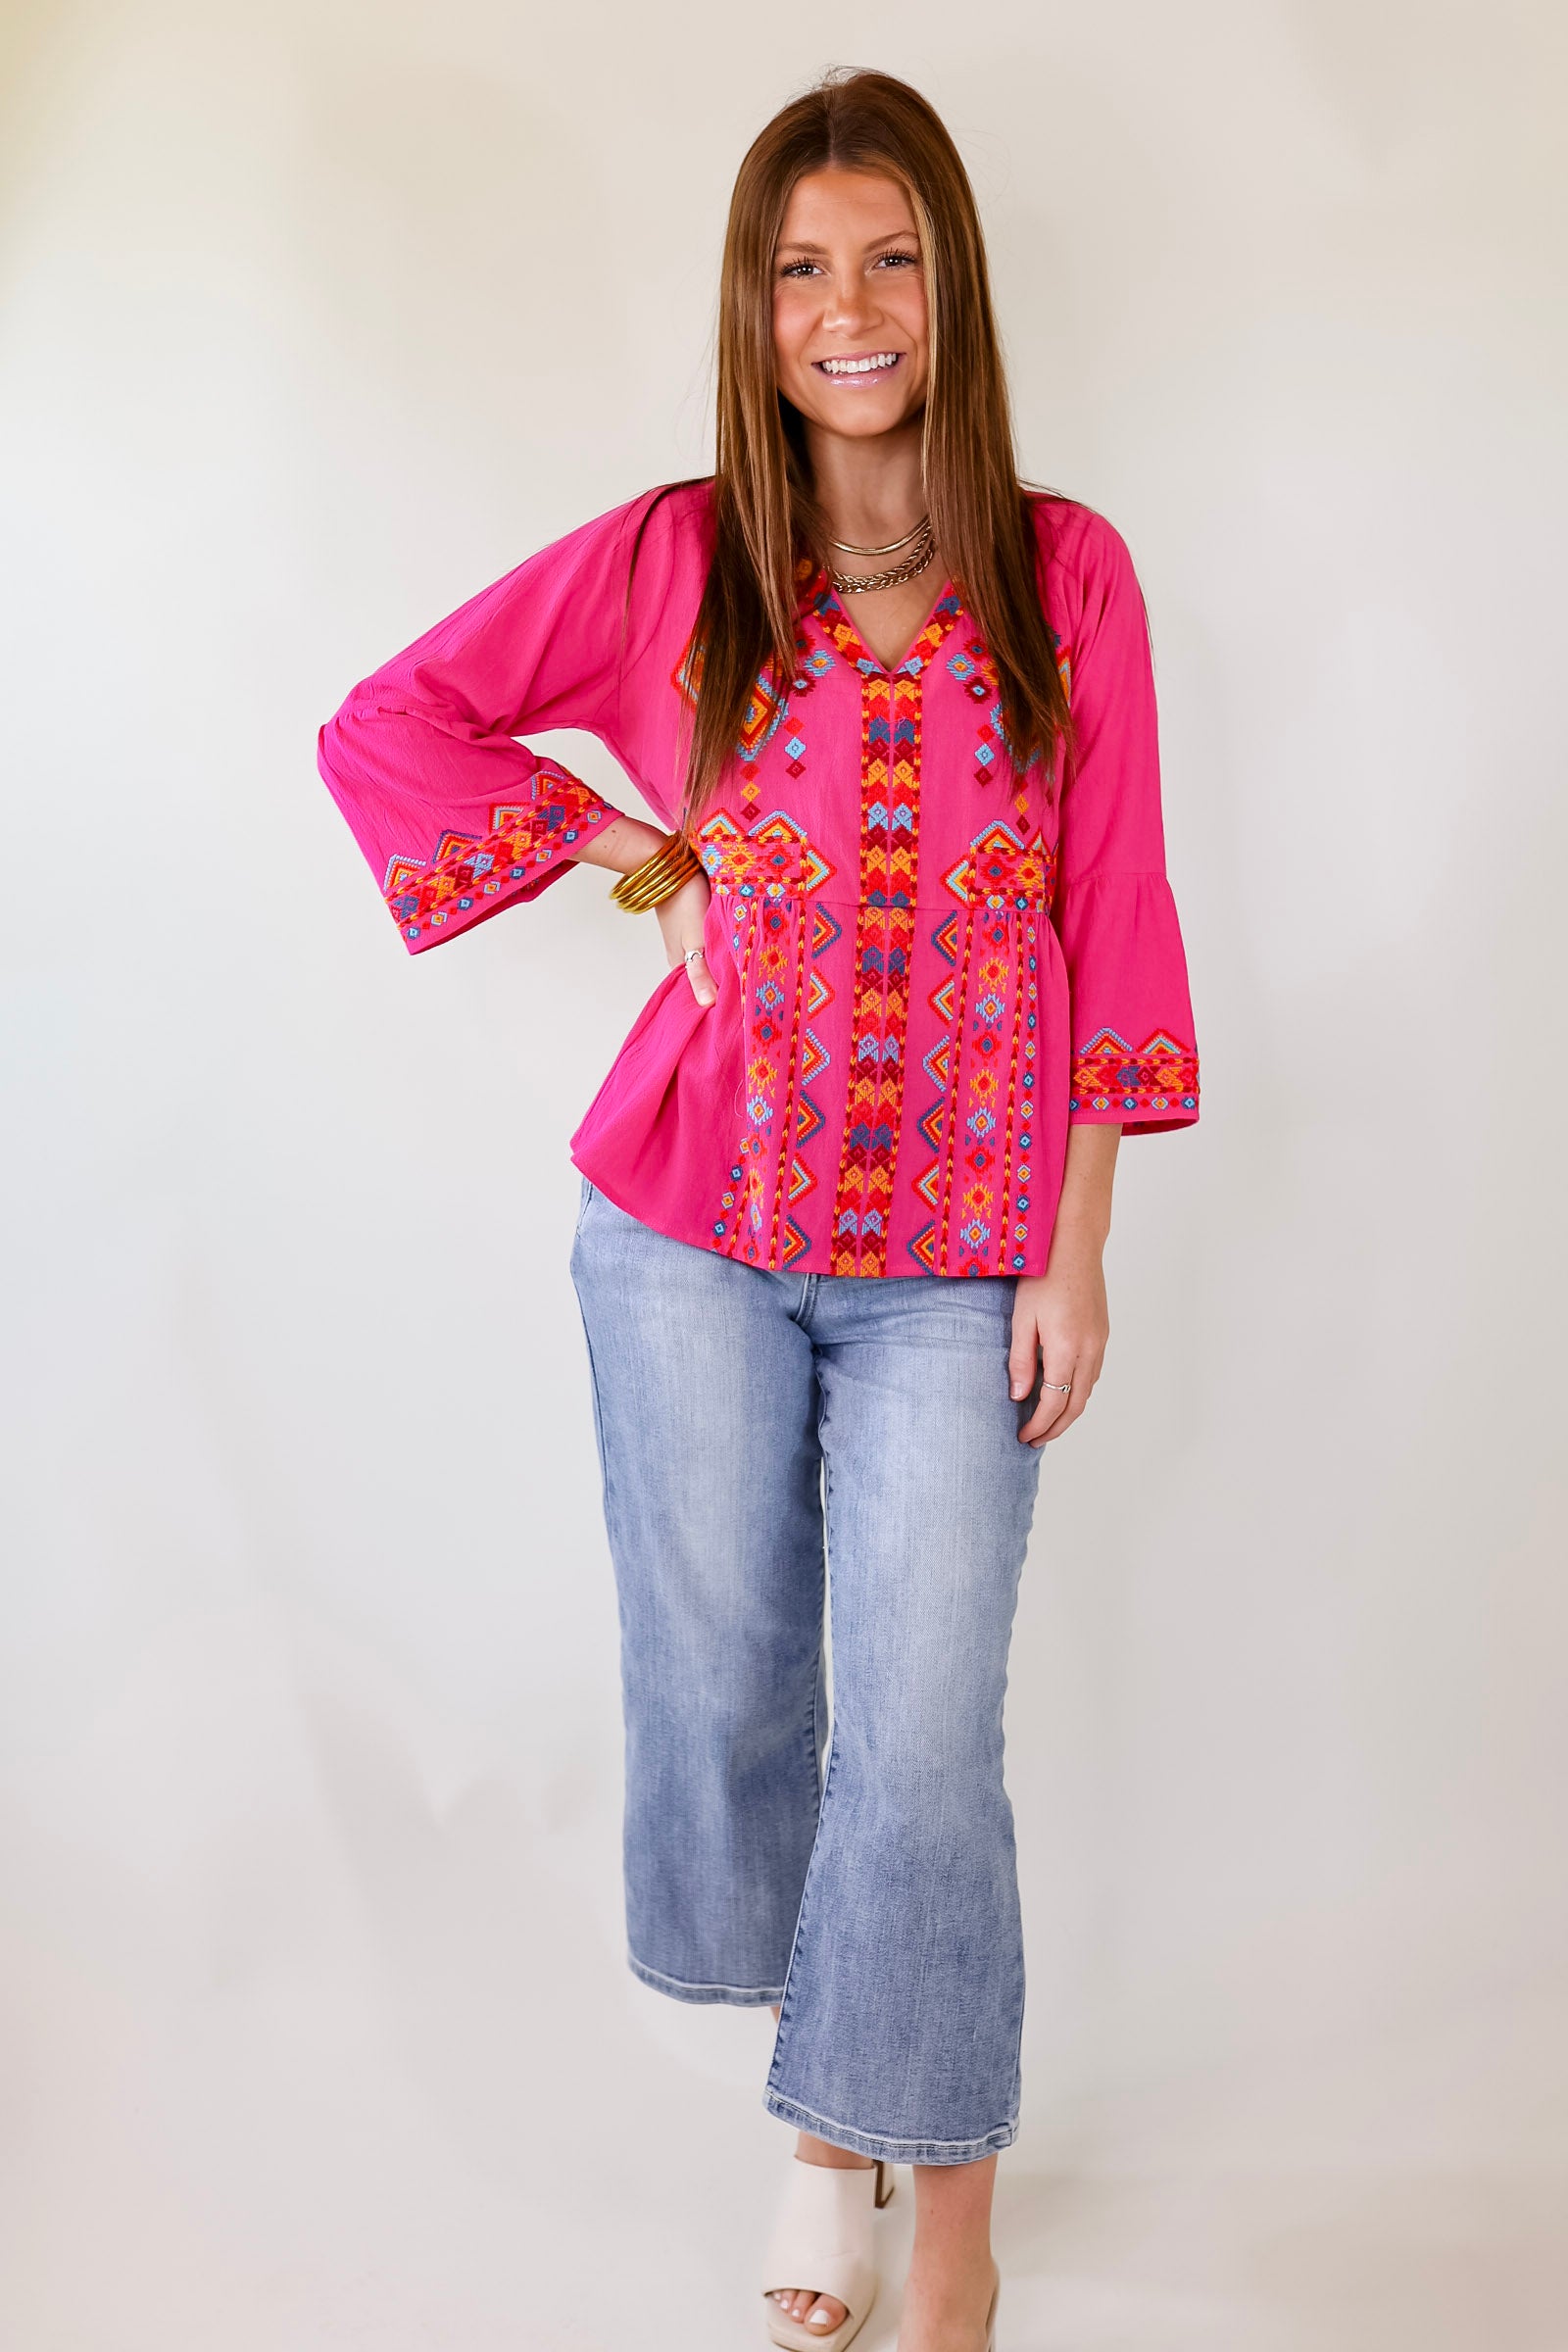 The Party Has Arrived 3/4 Sleeve V Neck Top With Embroidered Tribal Print in Pink - Giddy Up Glamour Boutique